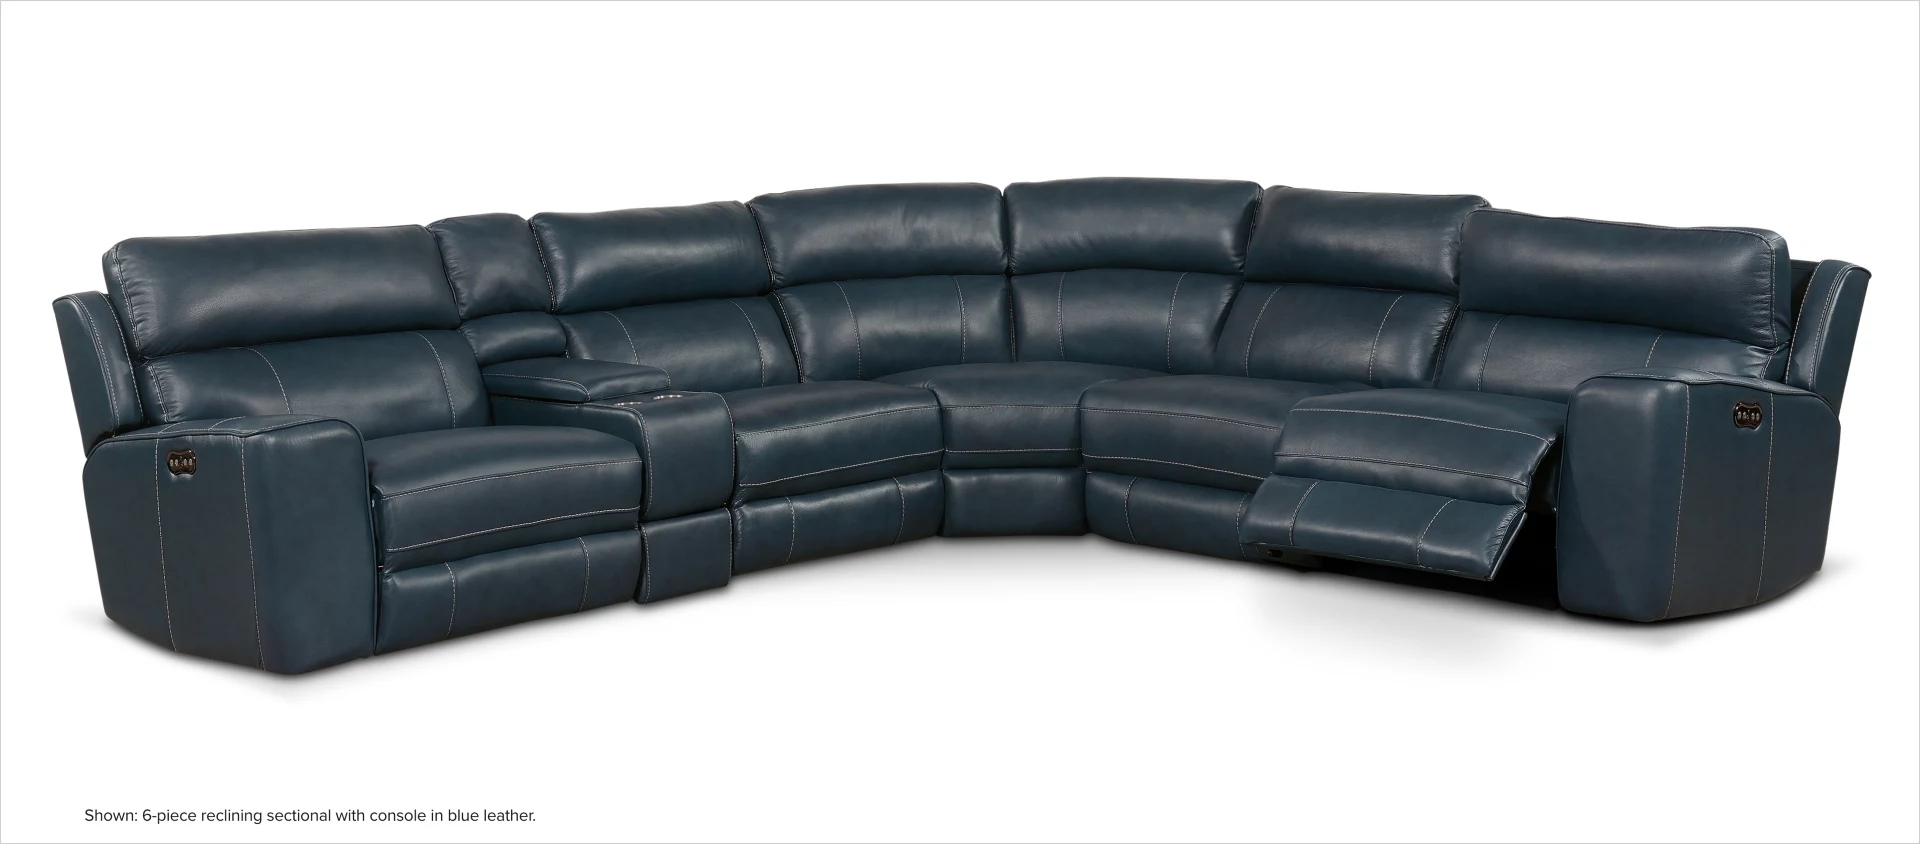 Newport 6-piece reclining sectional with console in blue leather.